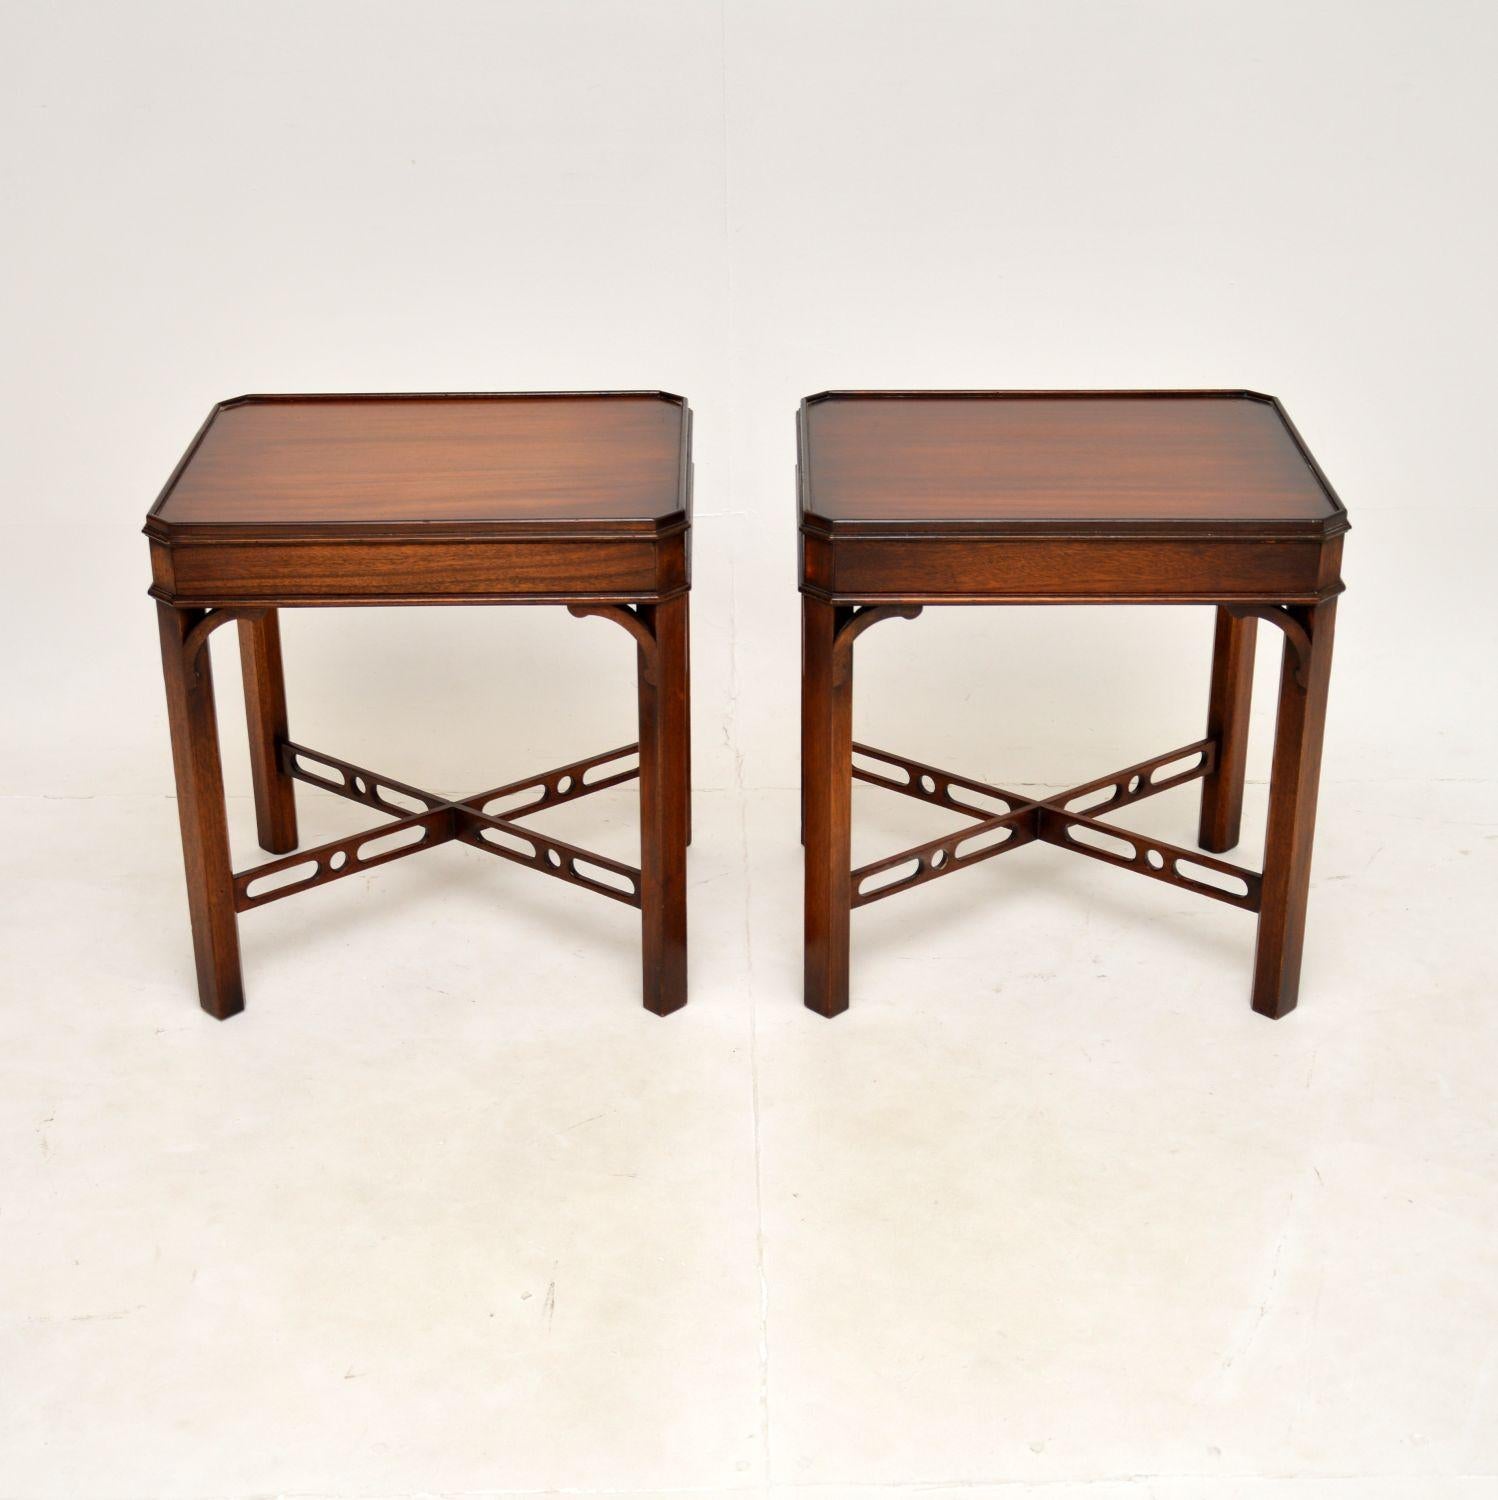 A smart and very useful pair of antique side tables in the Georgian style. There were made in England, they date from around the 1950’s.

They are of excellent quality and are a useful size to be used as lamp tables. The rectangular tops have canted